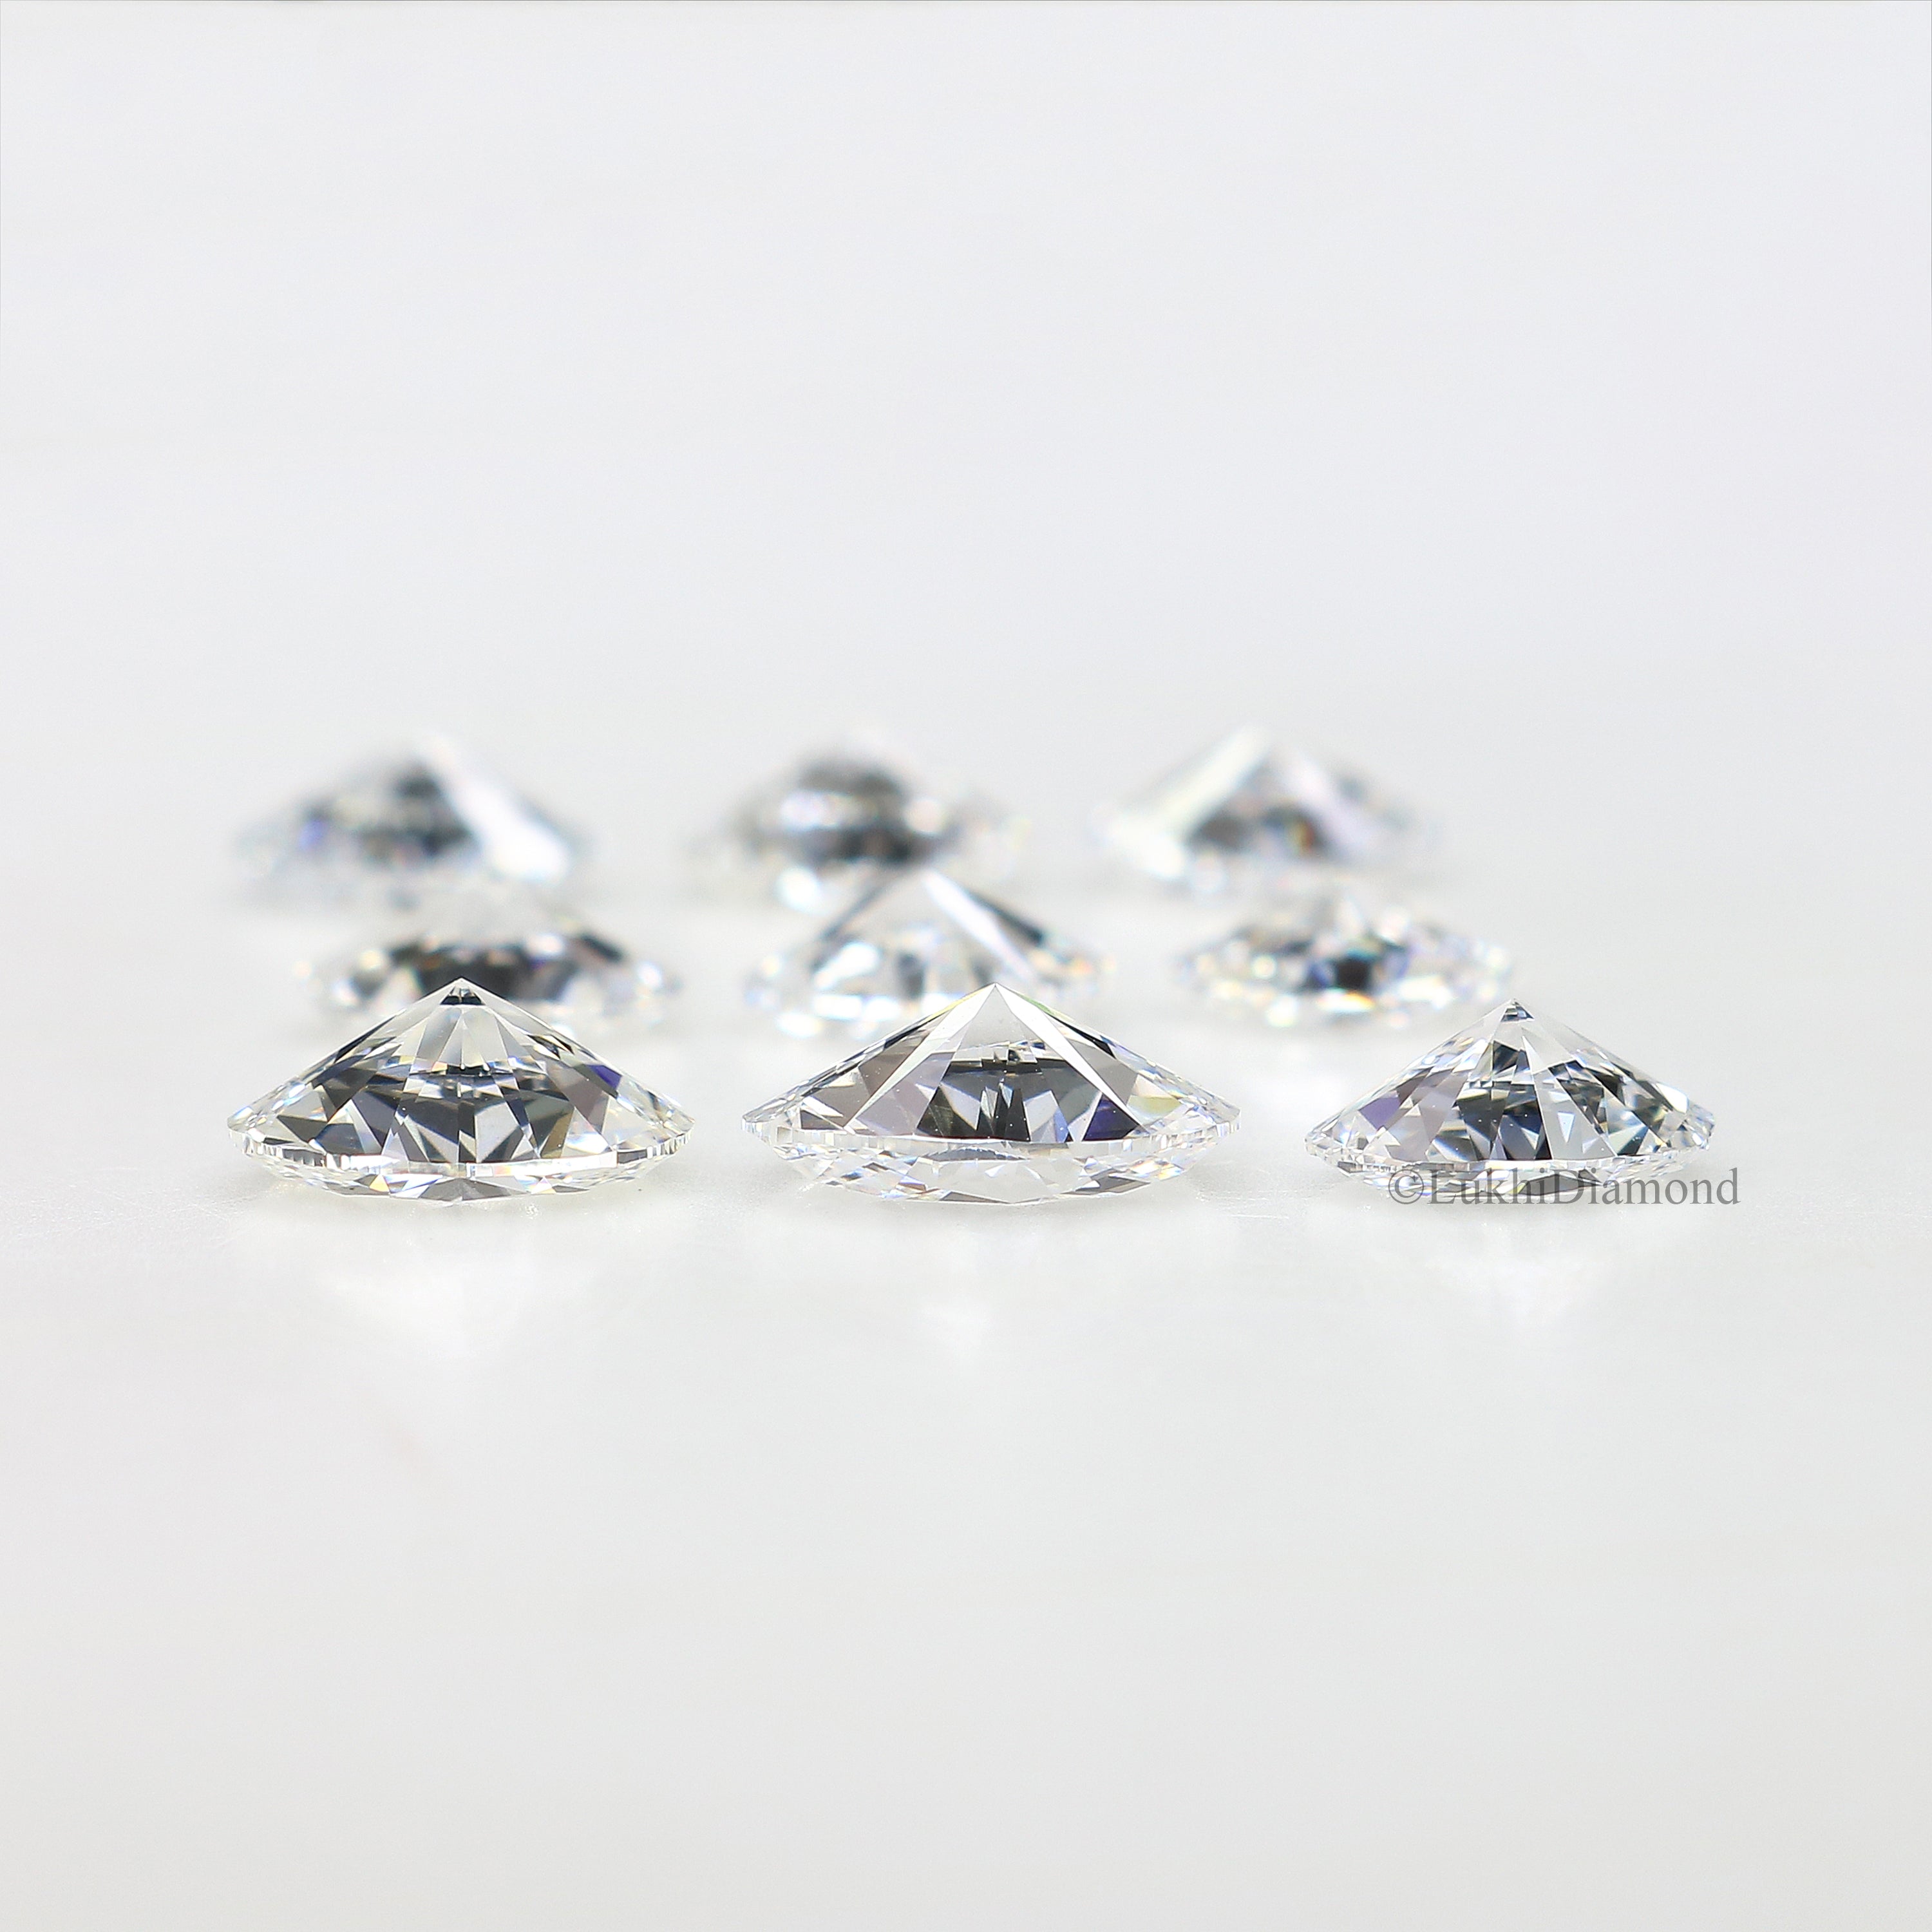 Oval Cut Lab Grown Diamond 4X3/5X3/6X4 MM Size Oval Loose Lab Man Made Diamond 2 PCs Pair For Earring Gift For Her Engagement Ring Q162